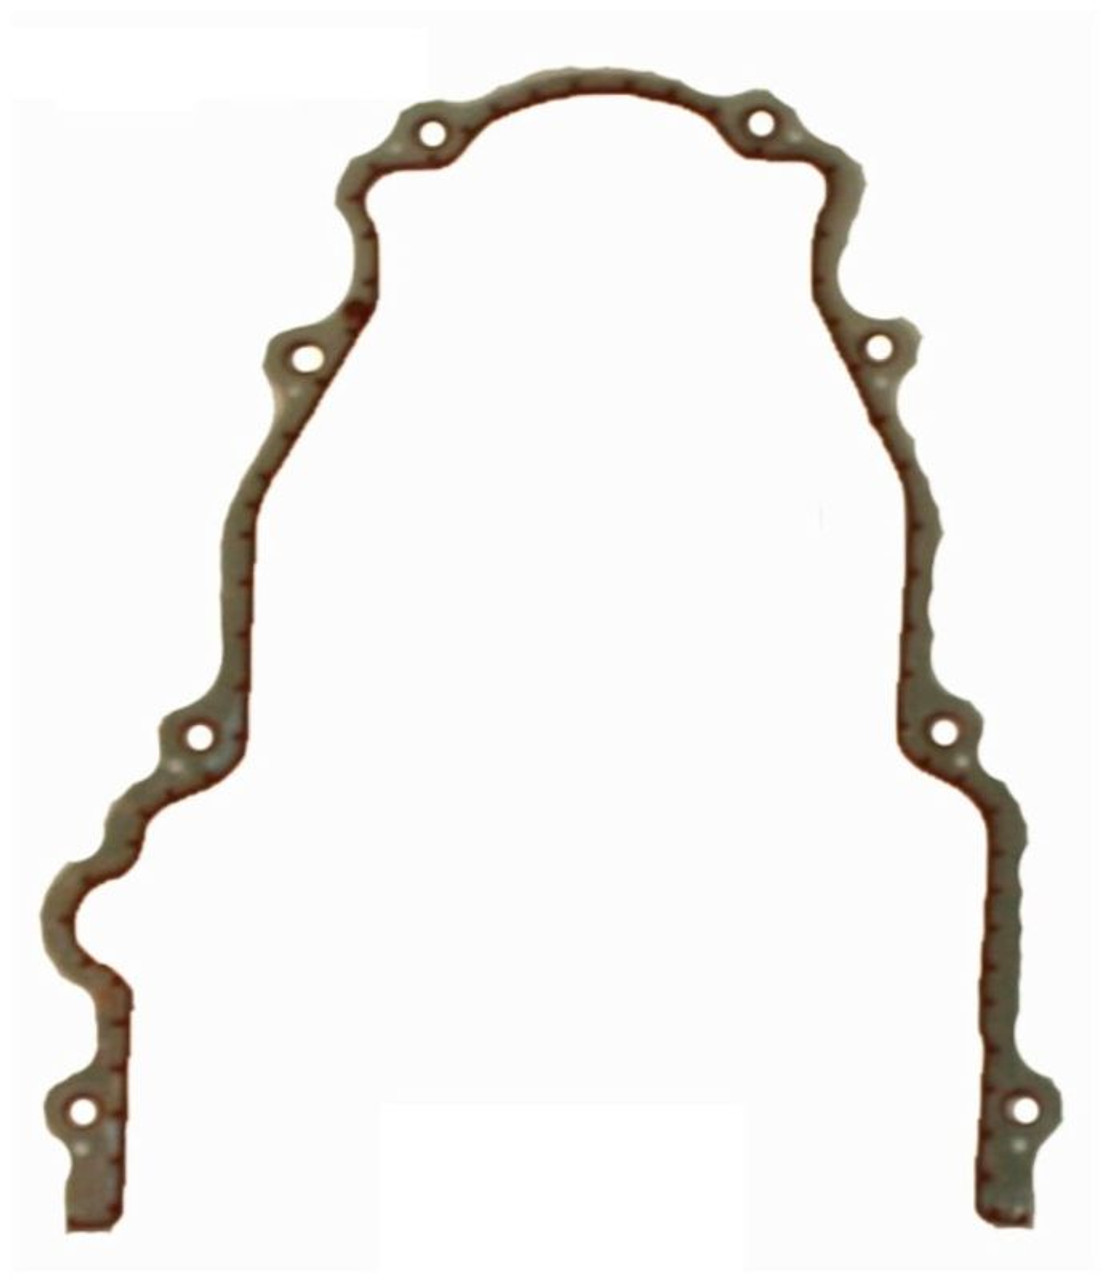 2014 Chevrolet Express 2500 6.0L Engine Timing Cover Gasket TCG293-A -870